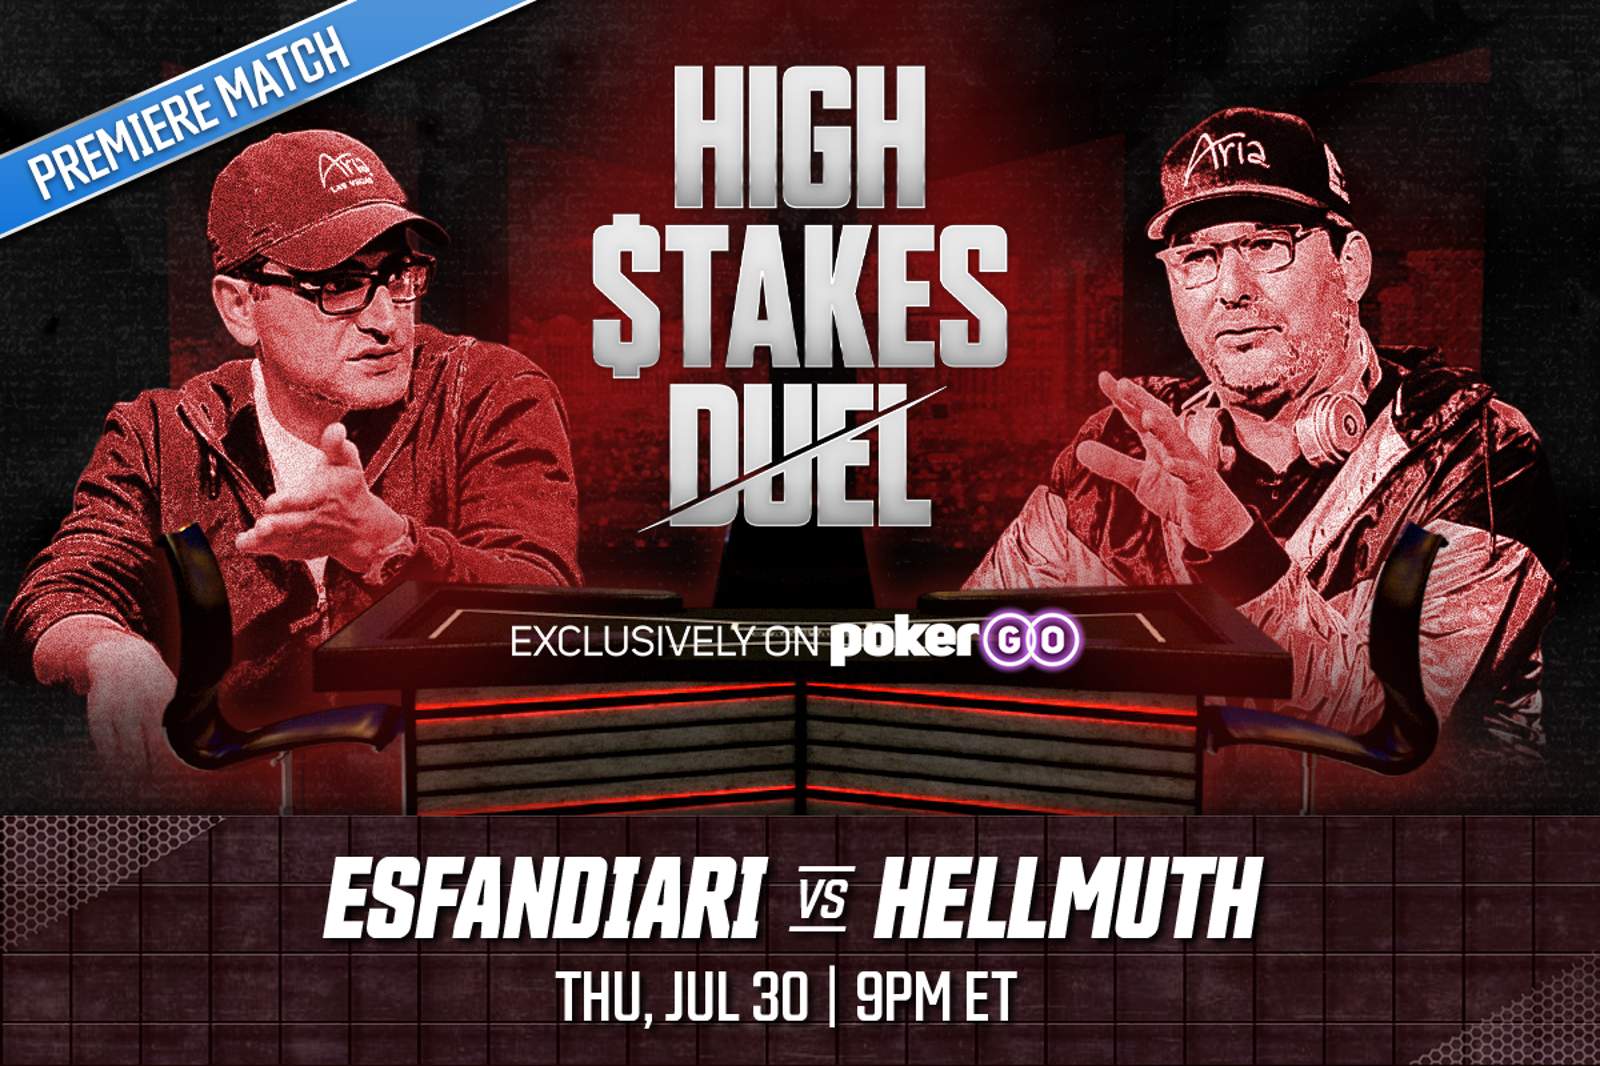 Antonio Esfandiari and Phil Hellmuth Square Off on High Stakes Duel Premiere This Thursday